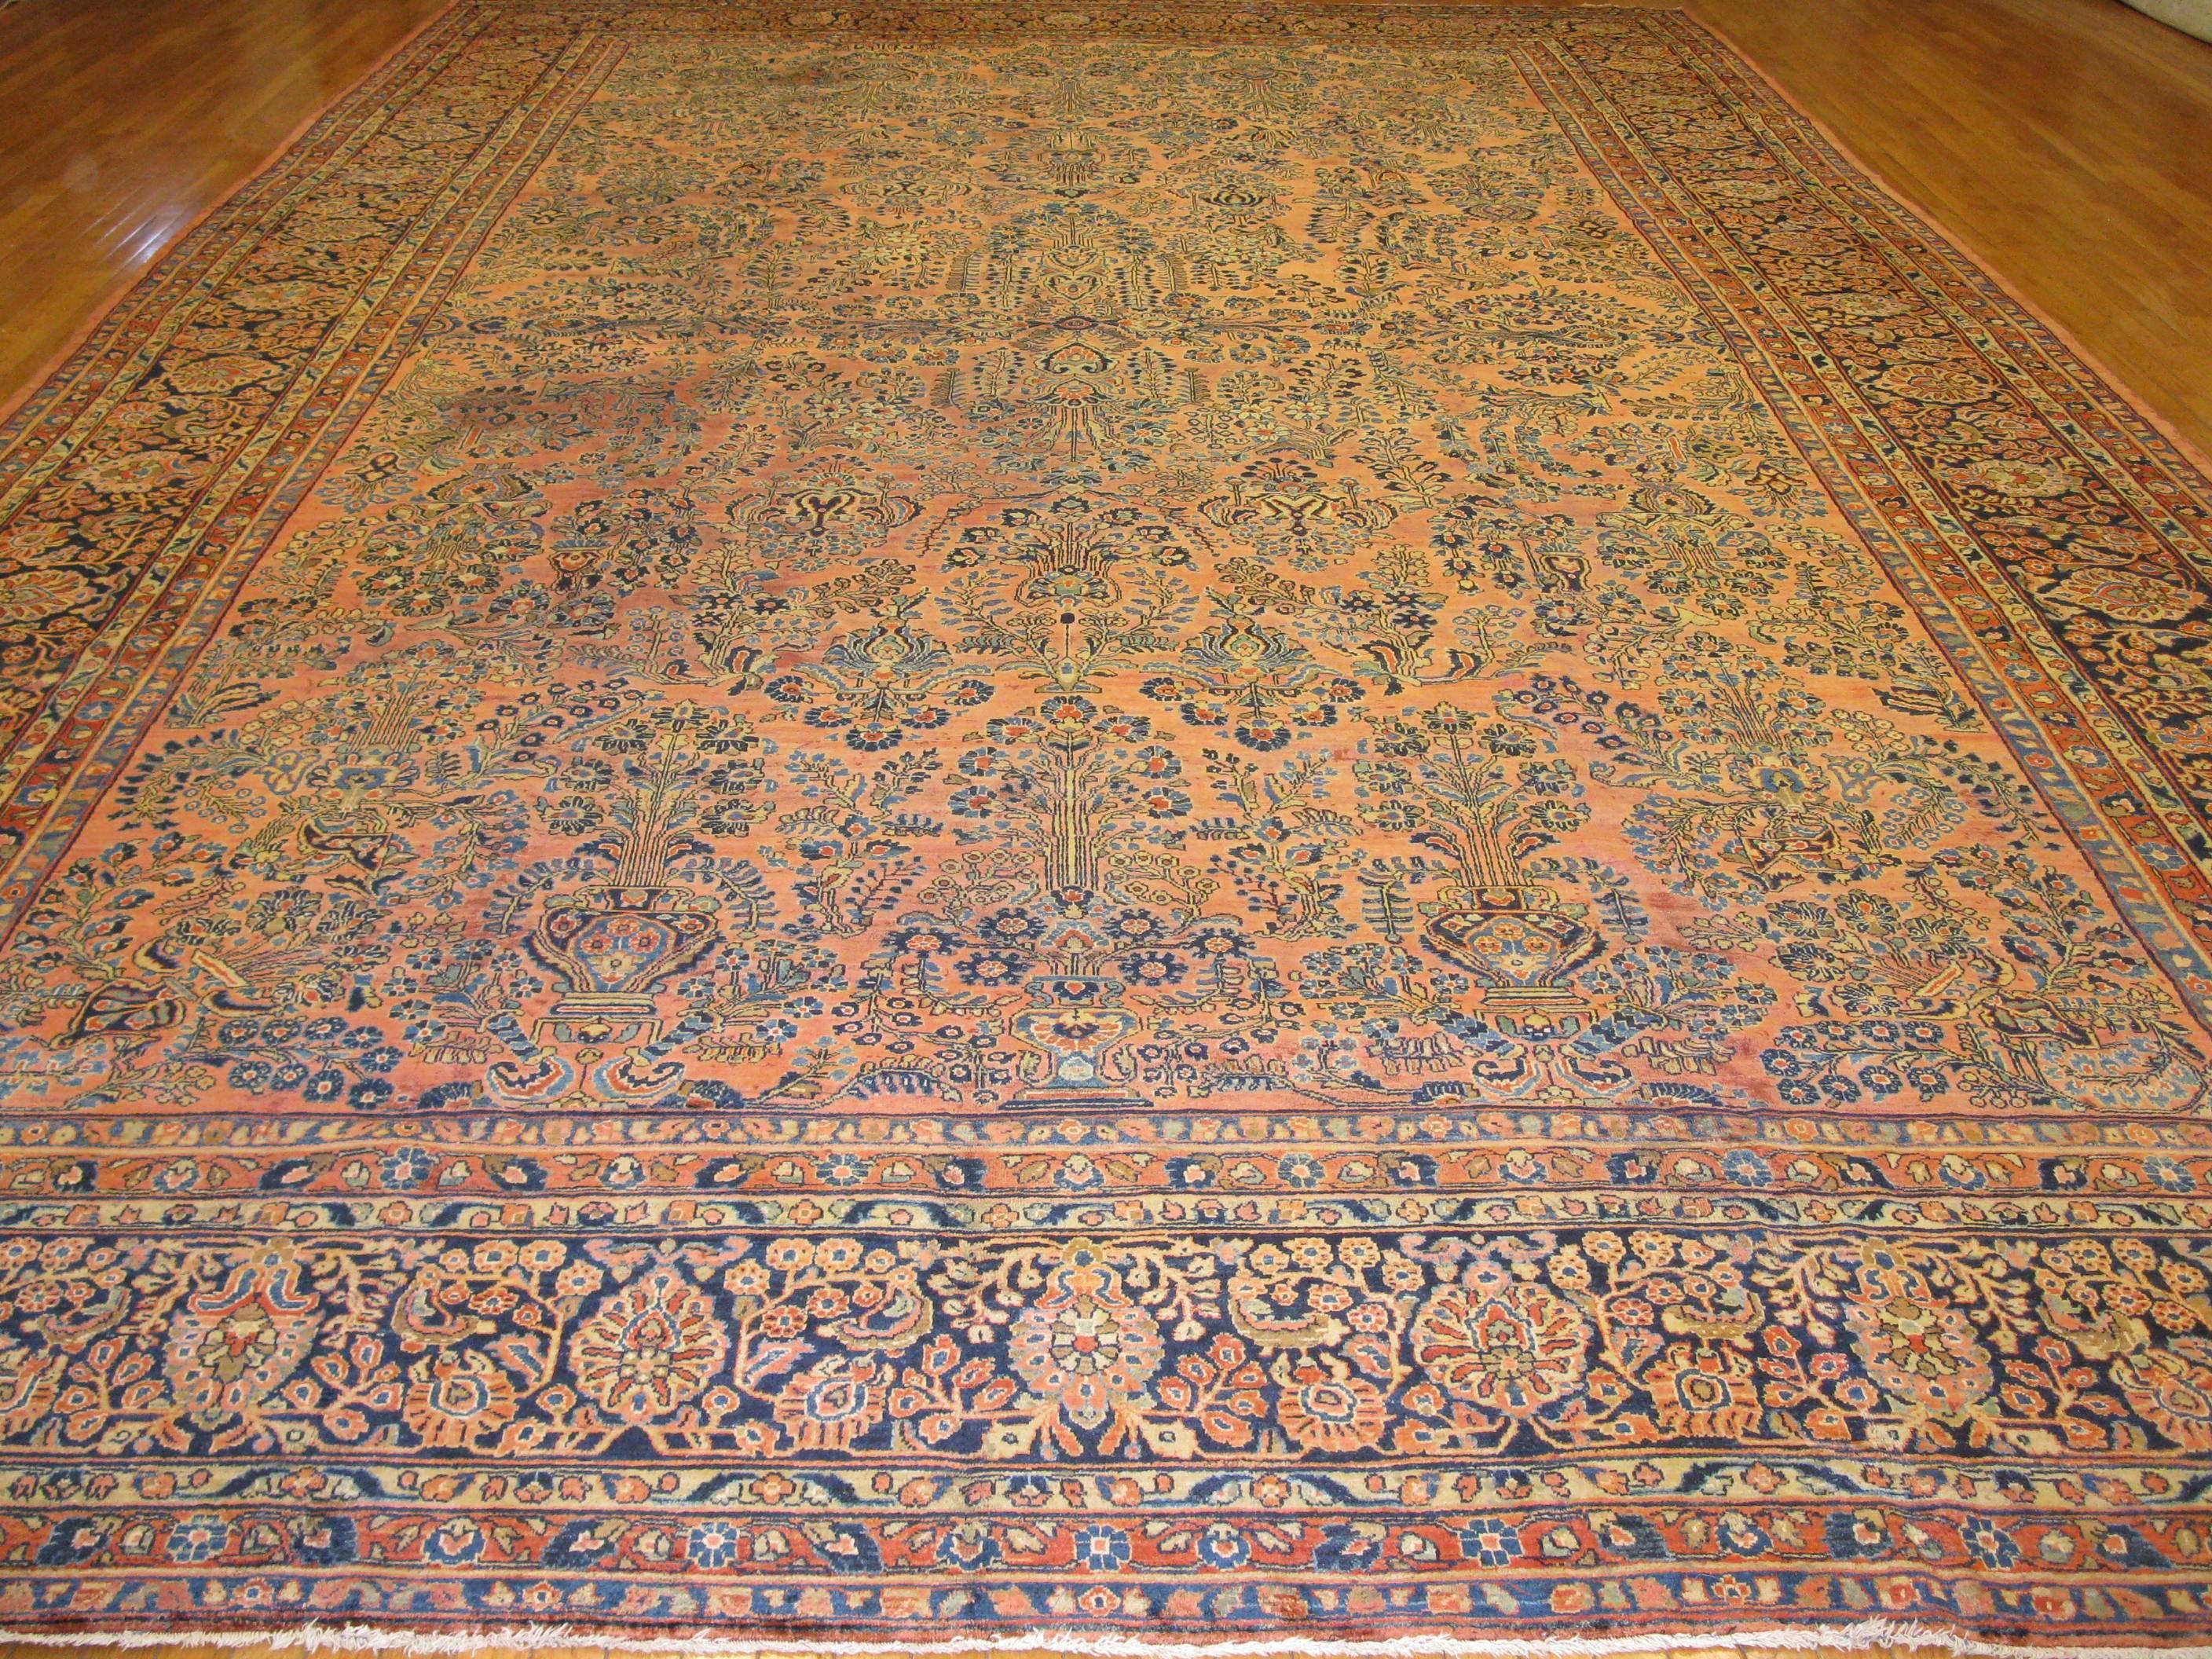 This is an elegant antique Persian Sarouk rug from Iran (Persian). The rug is the best example of the Sarouk rugs from around the turn of century with intricate all-over floral pattern on a copper color background. It measures 
12' 6